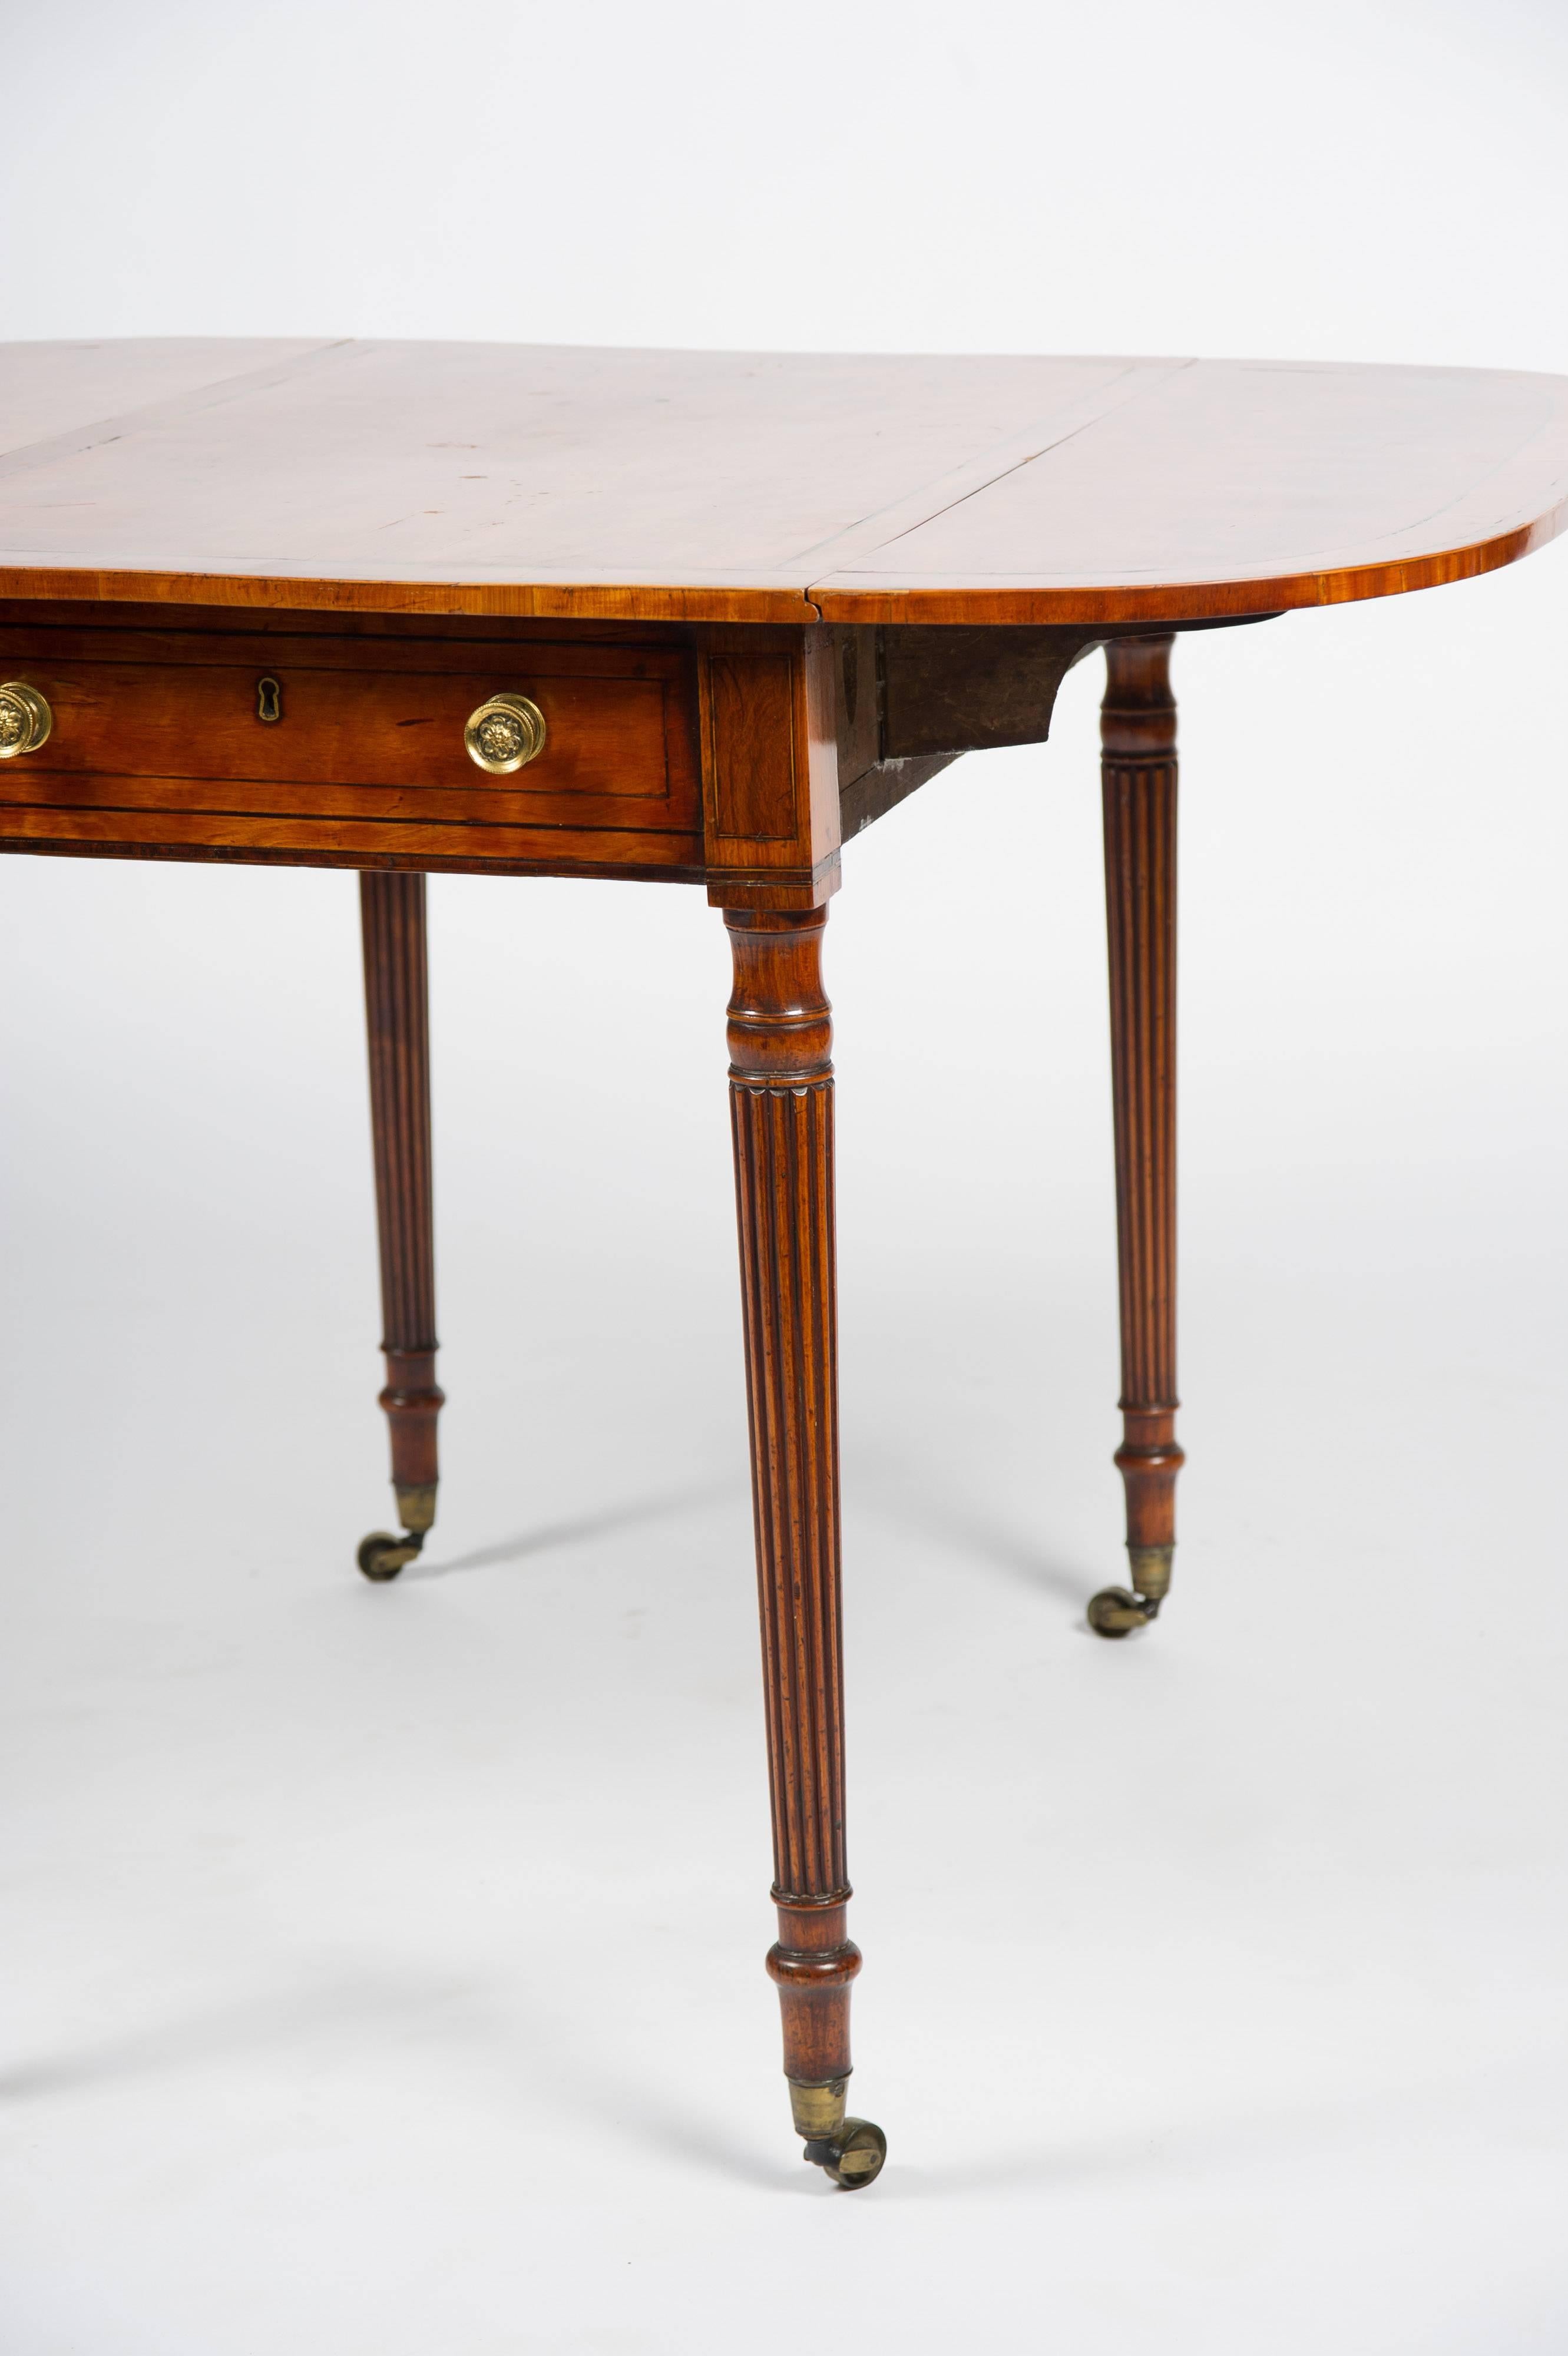 English Gillows Influenced Satinwood Pembroke Table